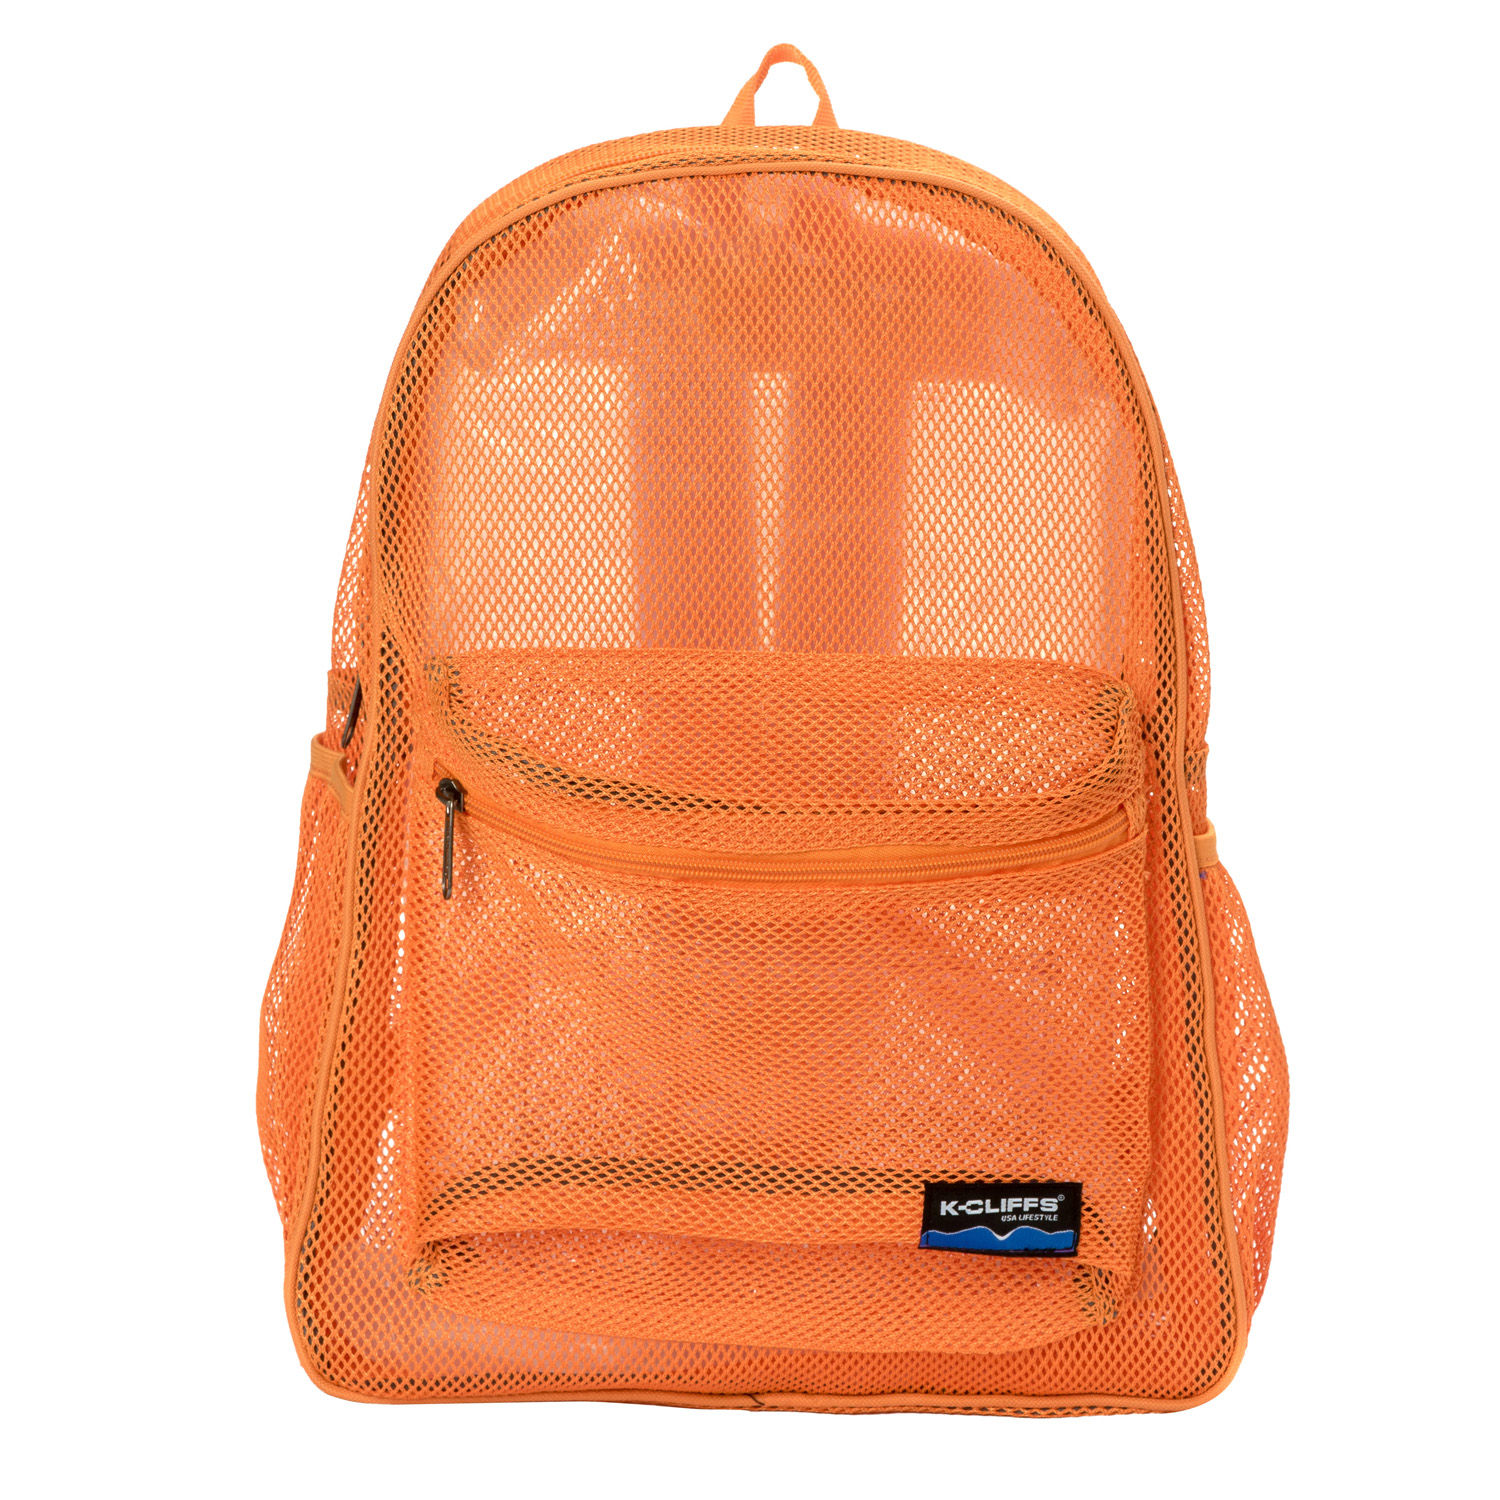 K-Cliffs Unisex Heavy Duty Classic Gym Student Mesh See Through Netting Backpack - image 4 of 6